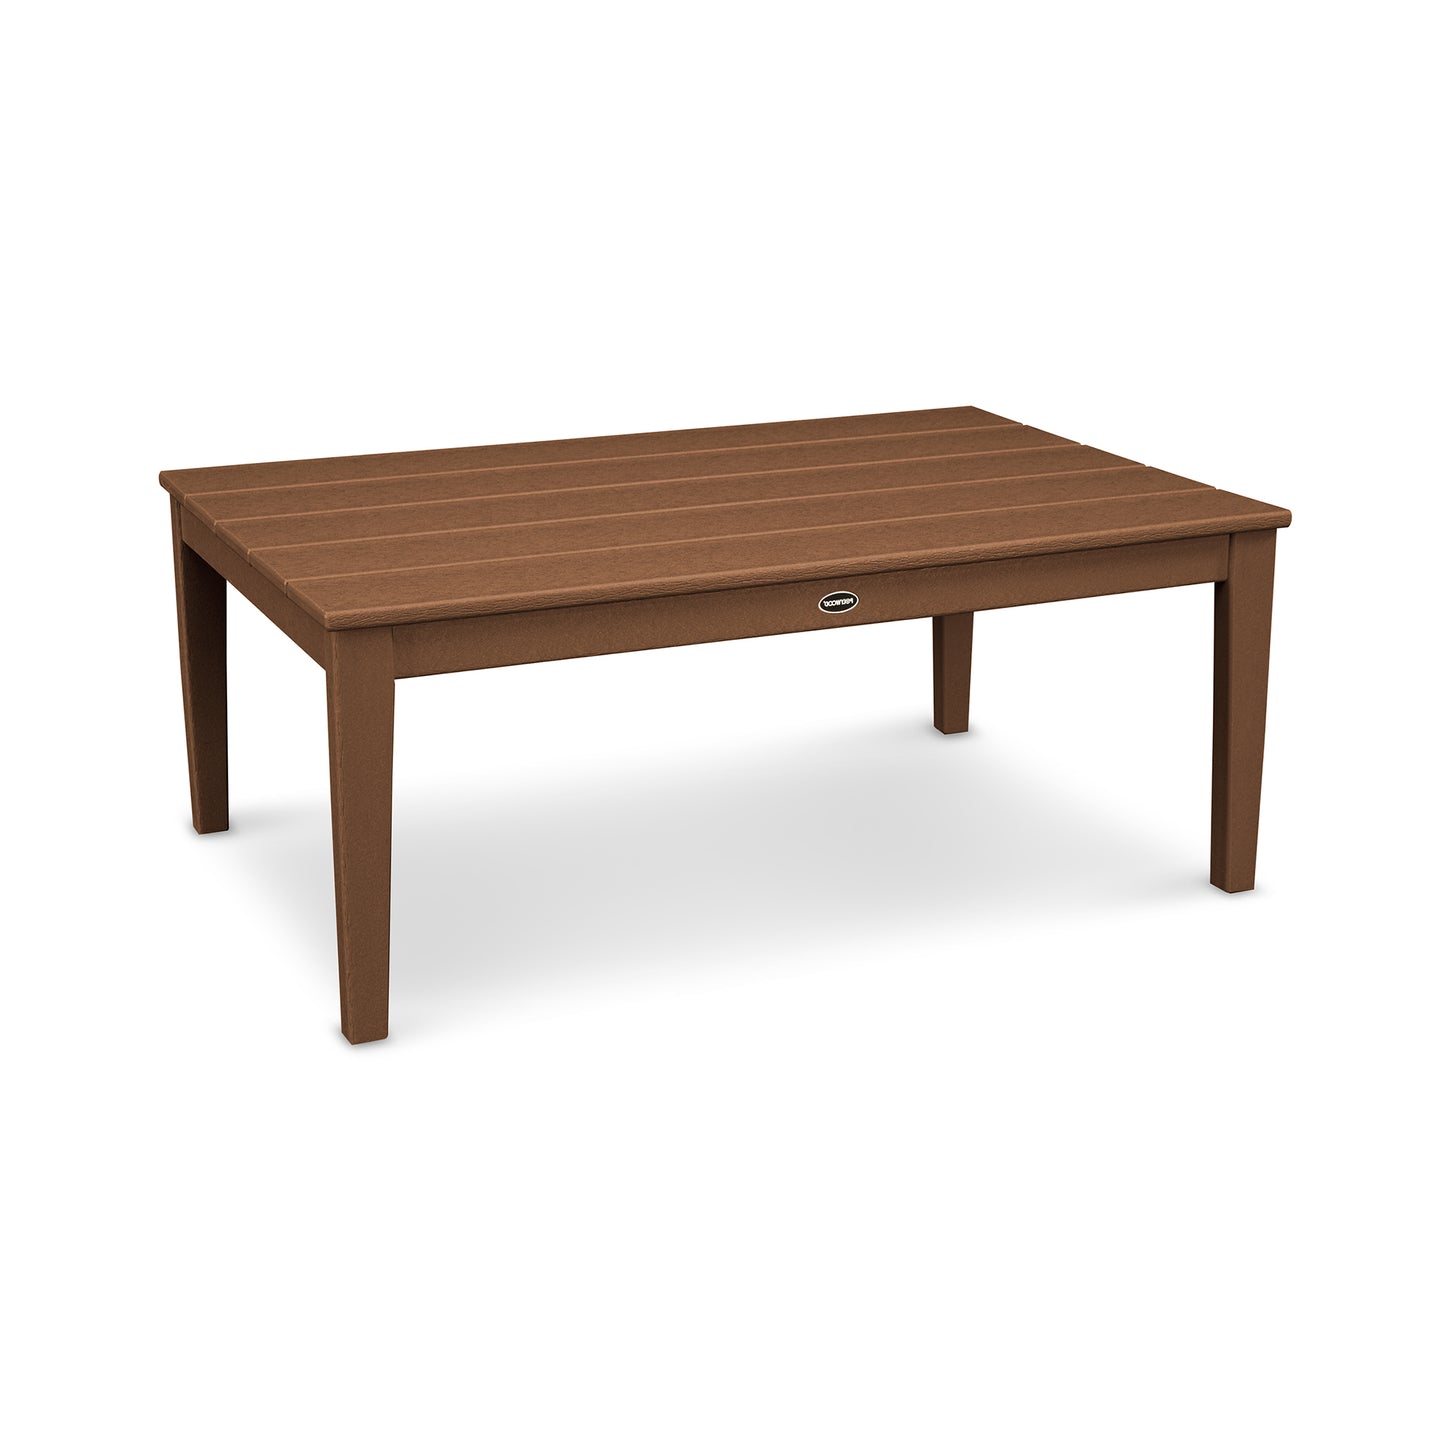 A rectangular brown POLYWOOD Newport 28" x 42" Coffee Table made of durable POLYWOOD® recycled plastic lumber, featuring a slatted design and a central hole for an umbrella. The table has four sturdy legs and a small company.